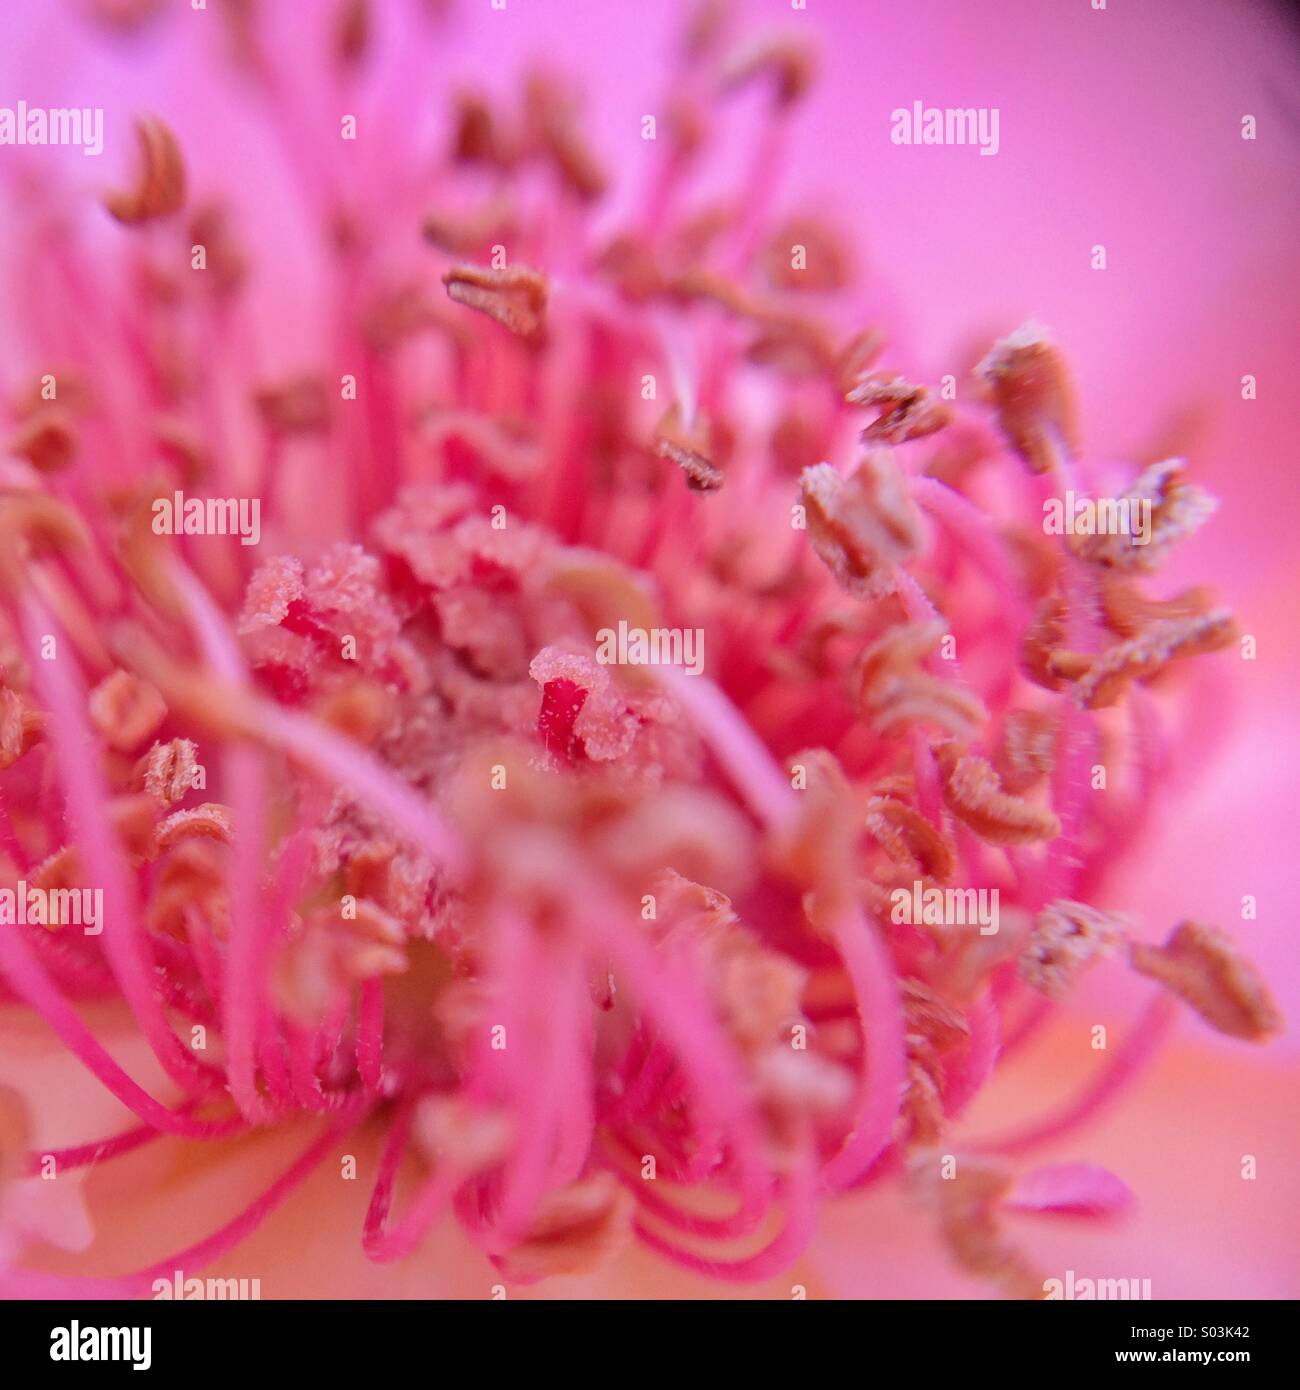 Macro of the center of a pink flower. Stock Photo